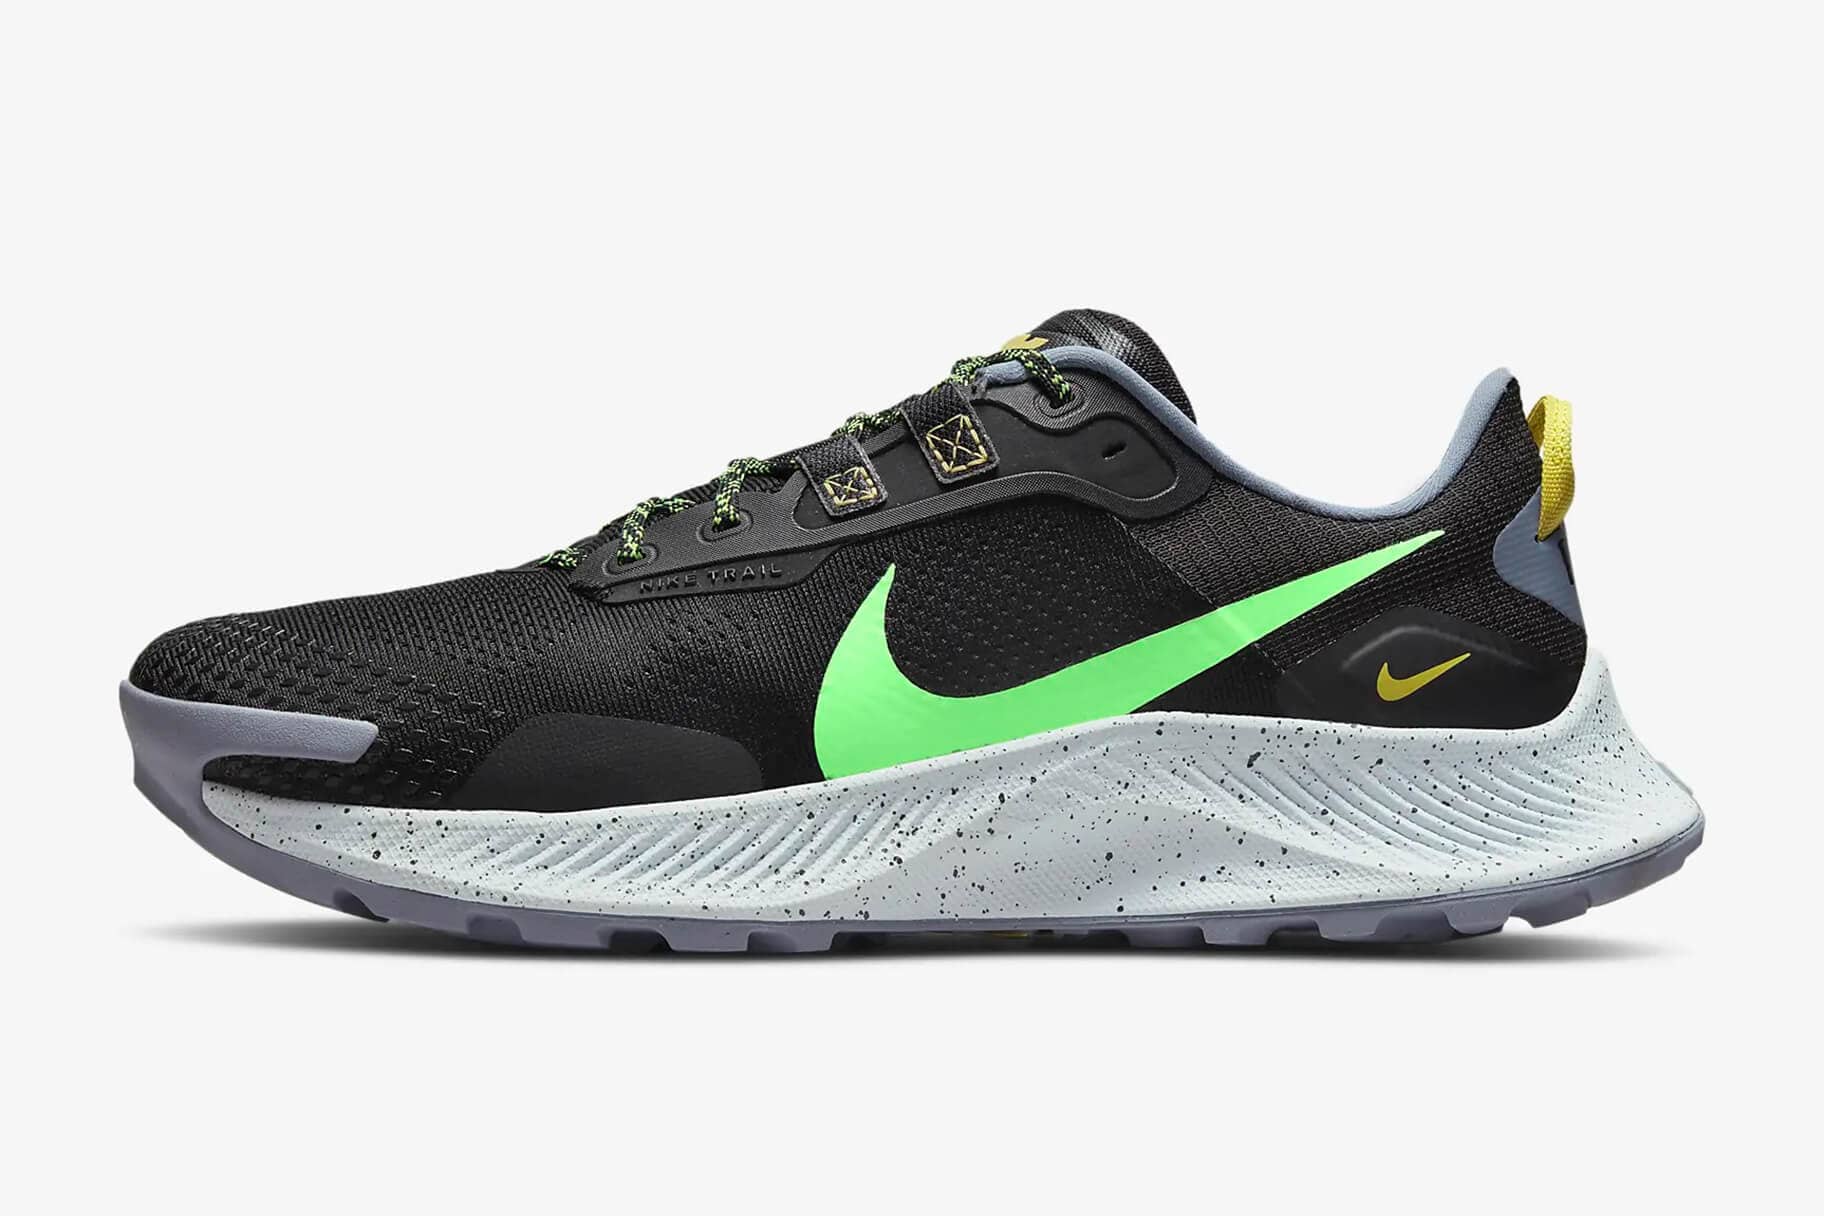 The Best Nike Running Shoes For Cross